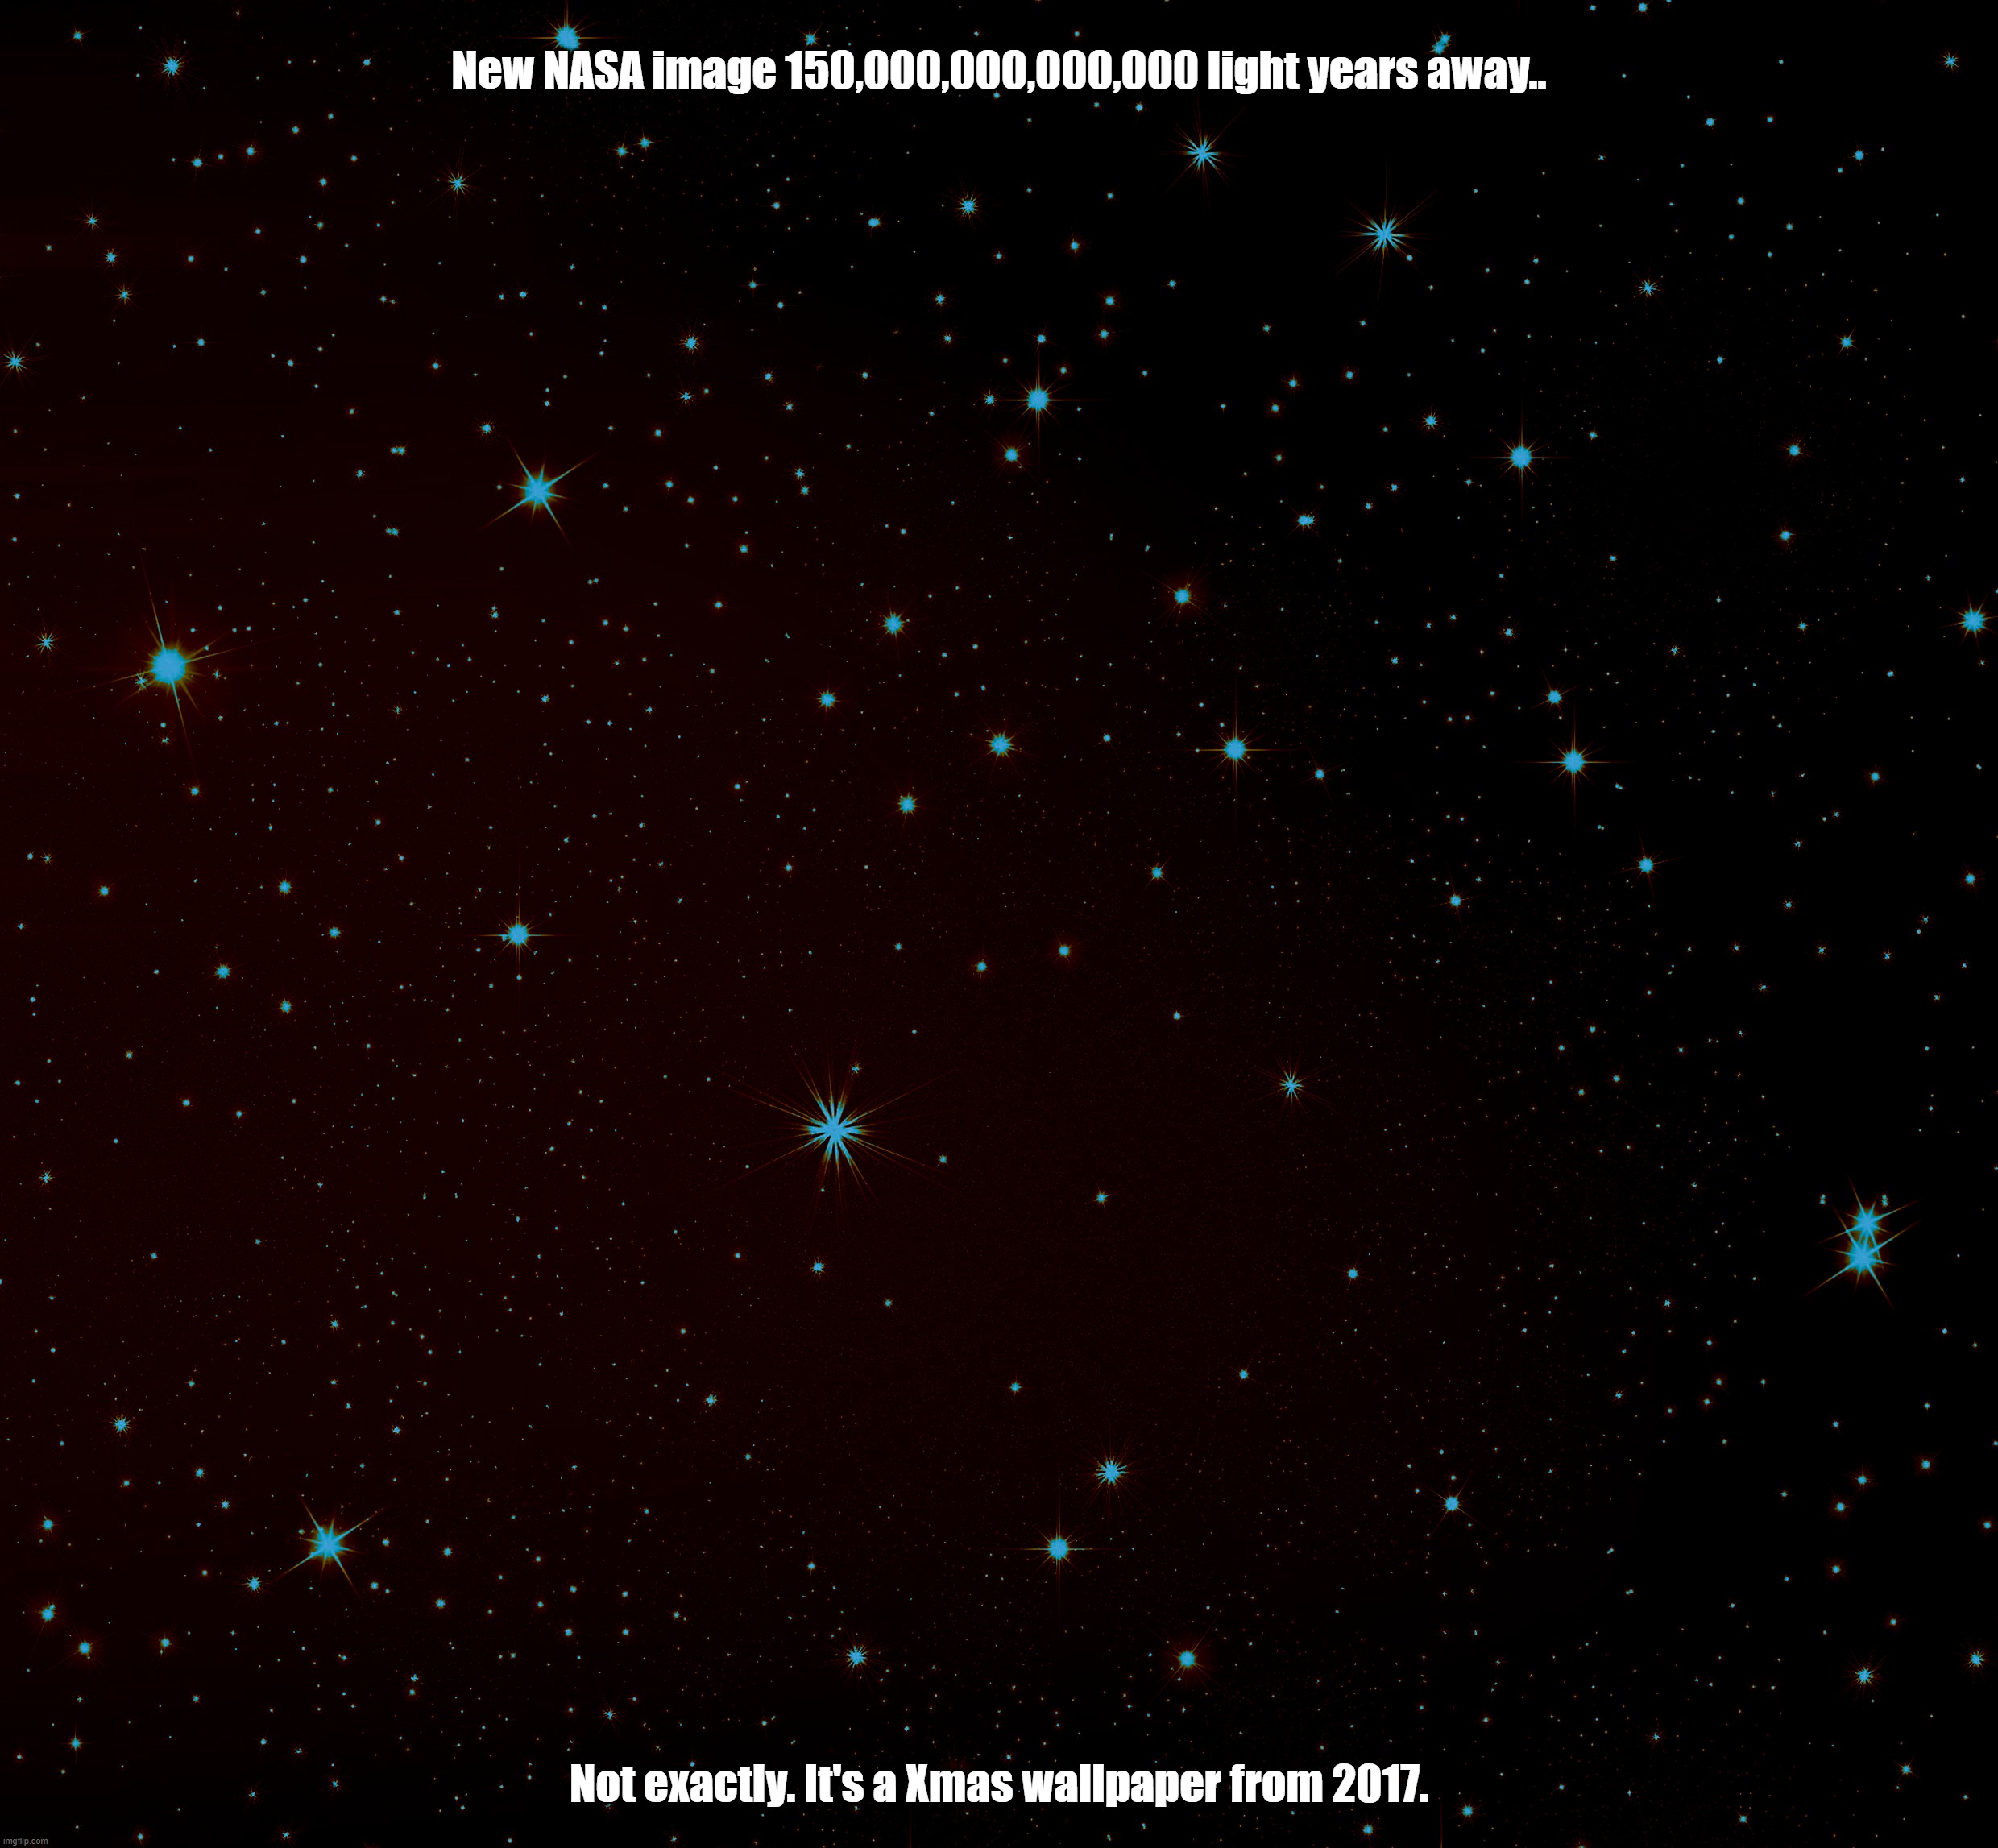 Television and Government would never Lie to you | New NASA image 150,000,000,000,000 light years away.. Not exactly. It's a Xmas wallpaper from 2017. | image tagged in nasa,stars,sky,xmas,television,government corruption | made w/ Imgflip meme maker